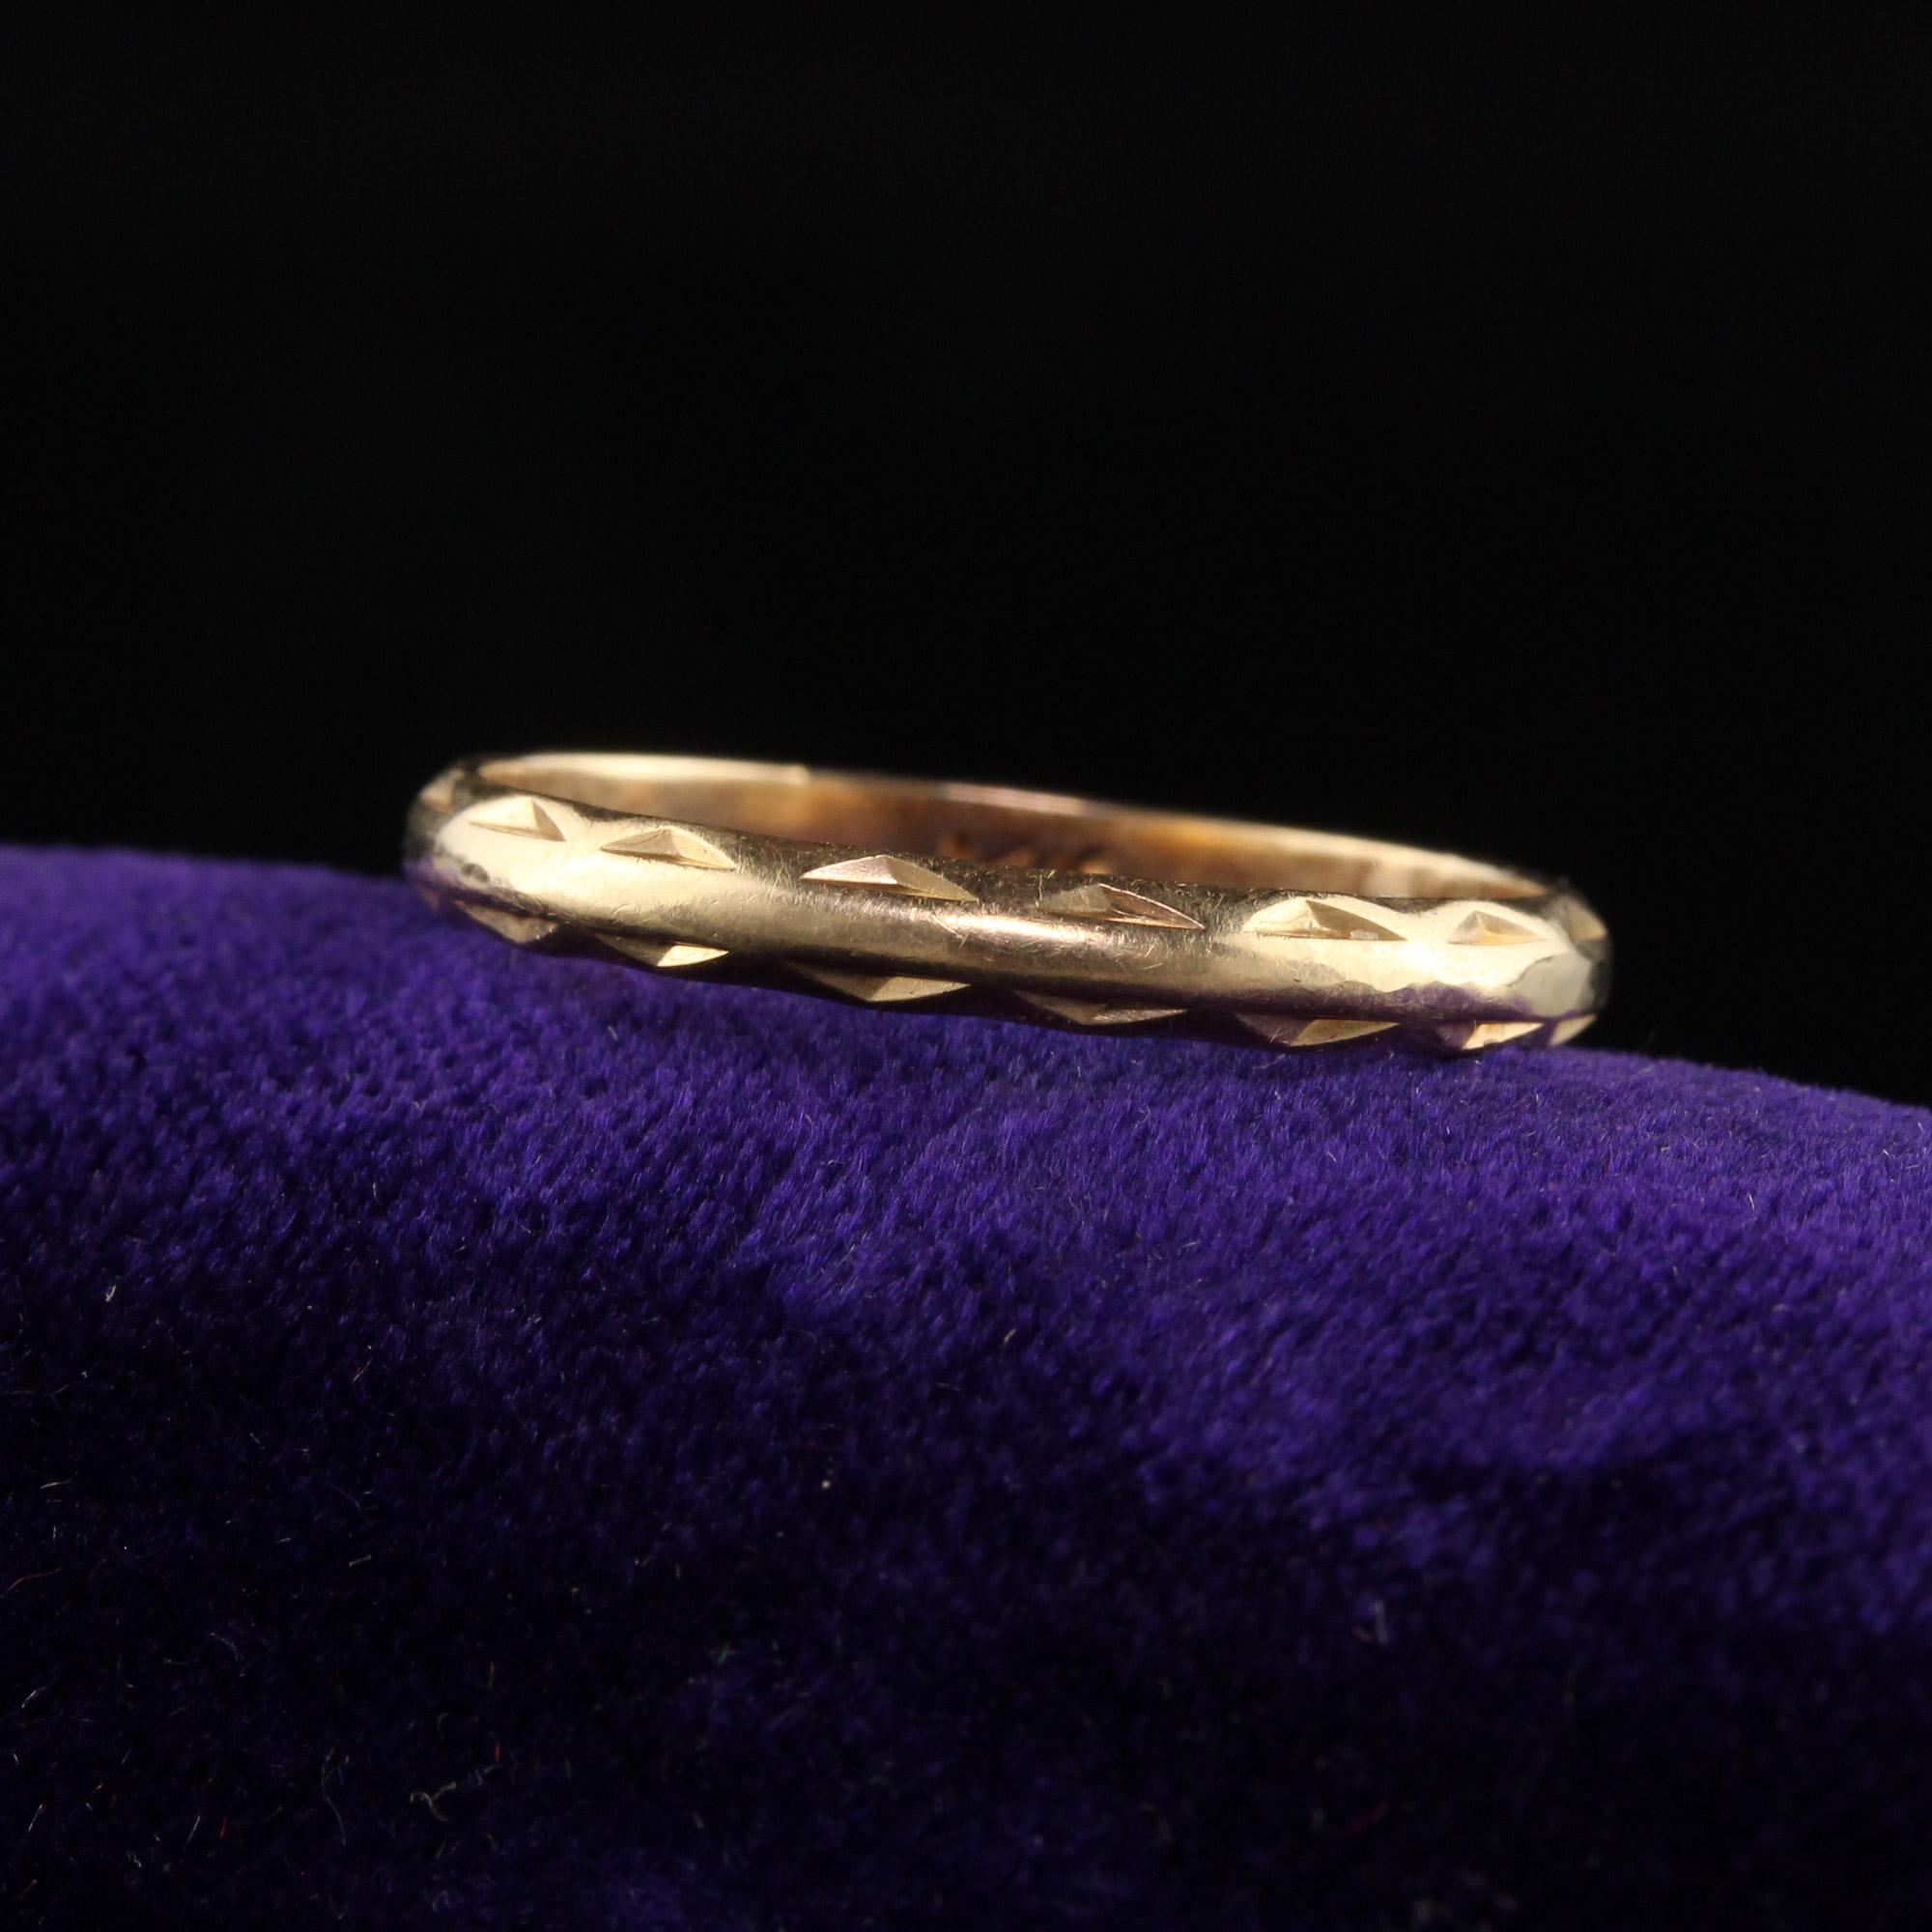 Beautiful Antique Art Deco 14K Yellow Gold Engraved Wedding Band. This beautiful wedding band is crafted in 14k yellow gold. There are deeply engraved patterns going around the entire ring and is in good condition.

Item #R1389

Metal: 14K Yellow